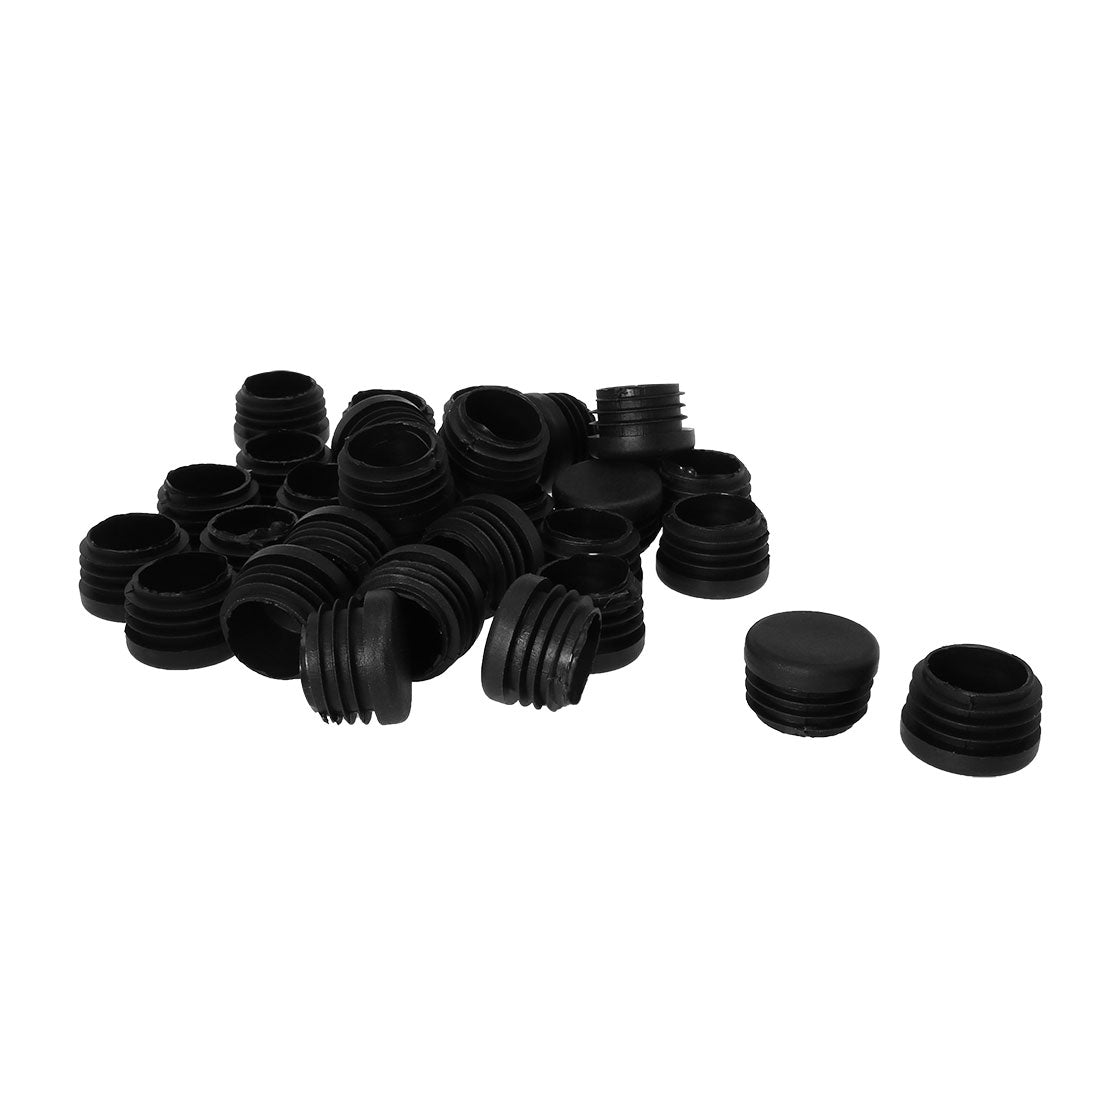 Uxcell Uxcell 1 1/4 " 1.26" OD Plastic Round Tube Insert Glide End Cap Pad 32pcs 1.14"-1.22" Inner Dia for Protect Office Porch Patio Garden